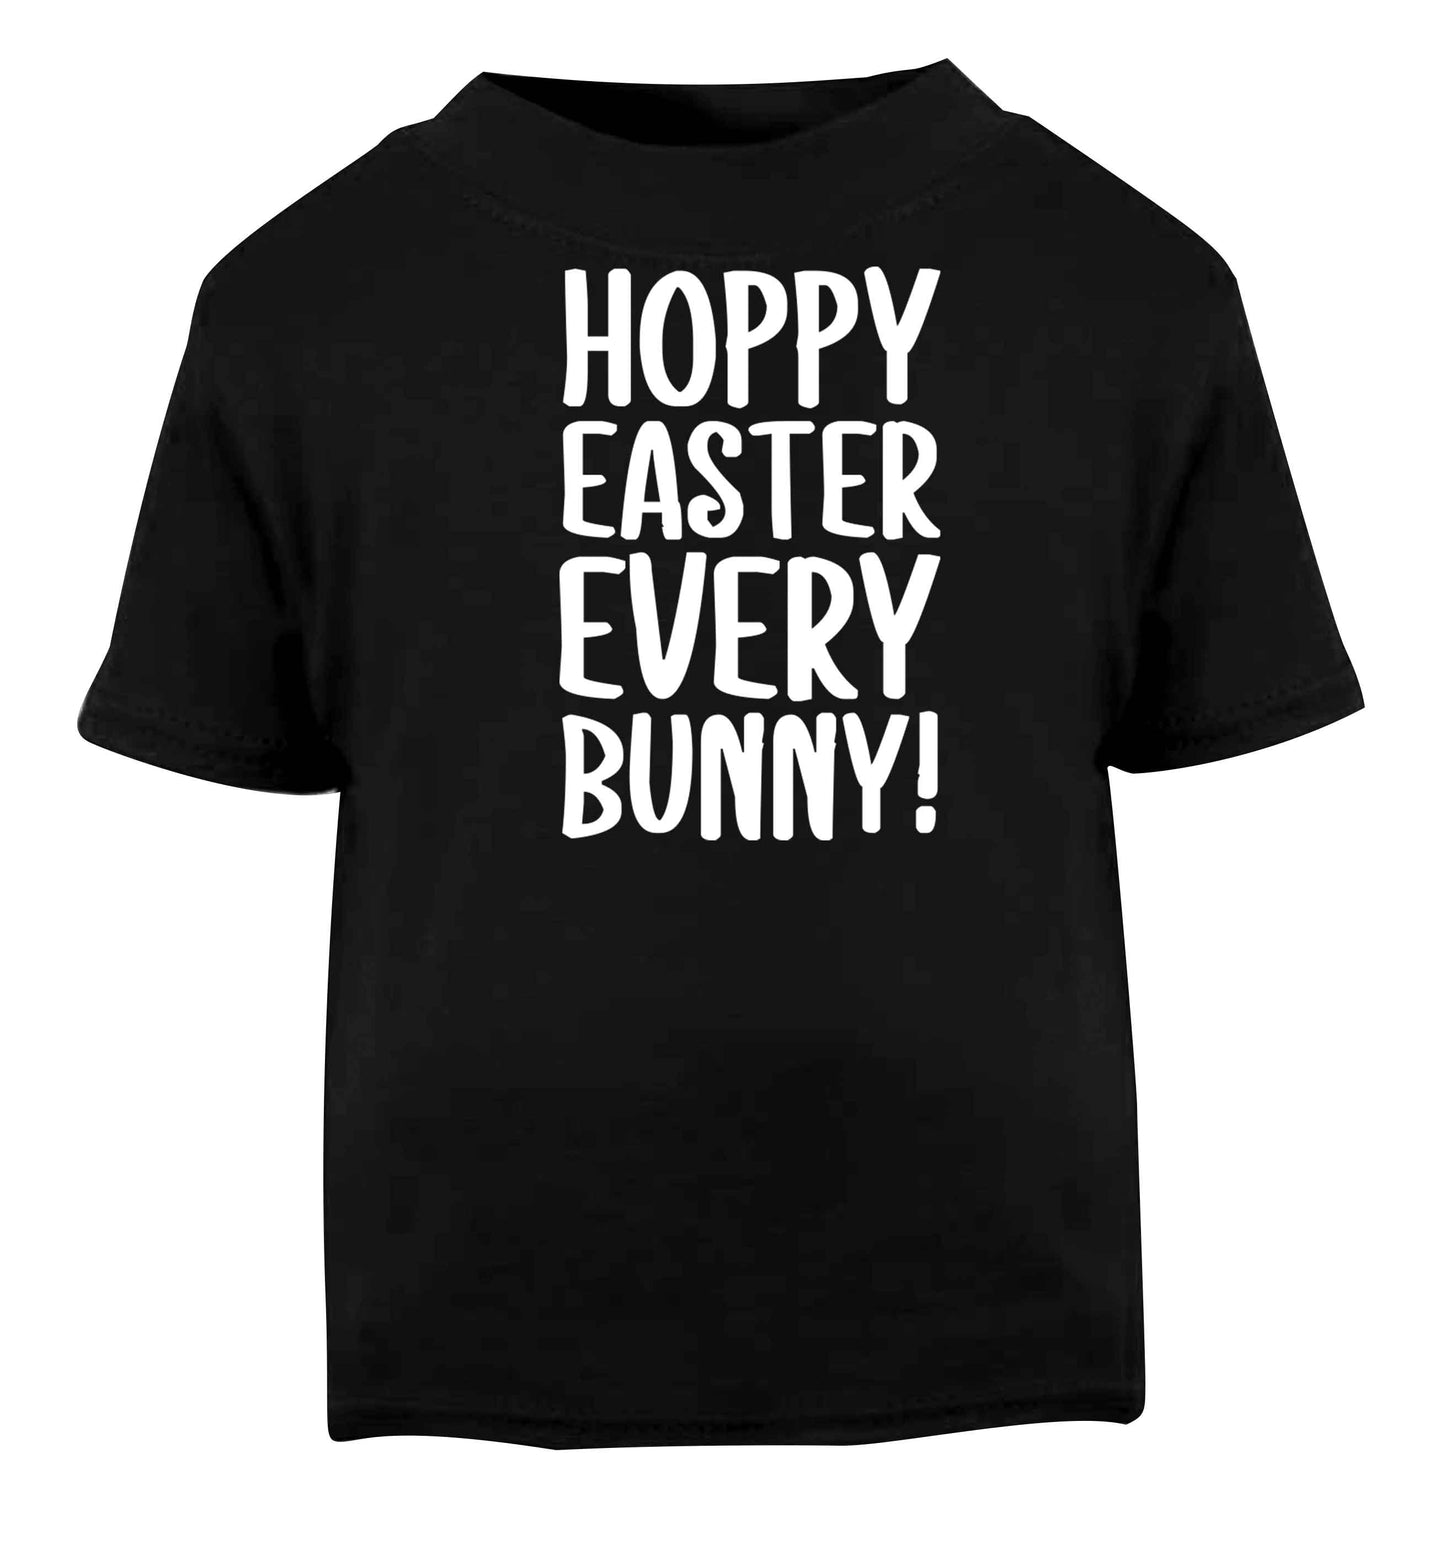 Hoppy Easter every bunny! Black baby toddler Tshirt 2 years